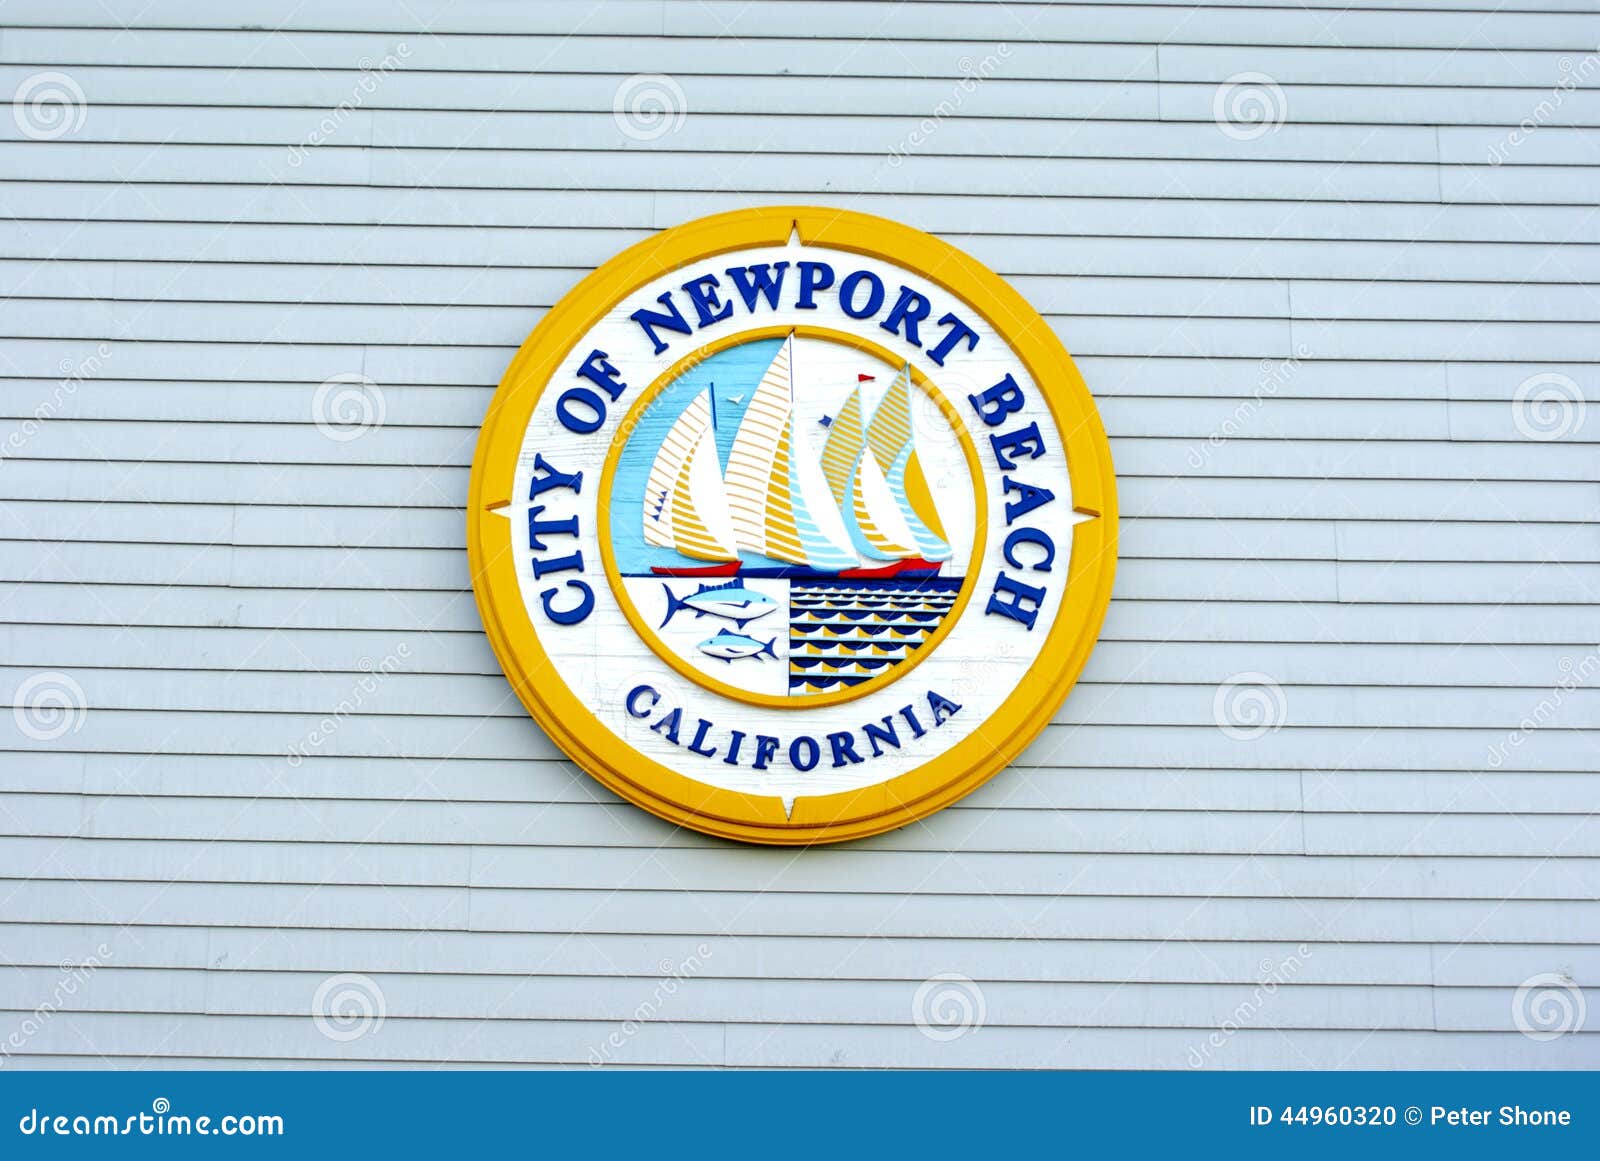 City Of Newport Beach Orange County California High-Quality Embroidered Patch 3" 